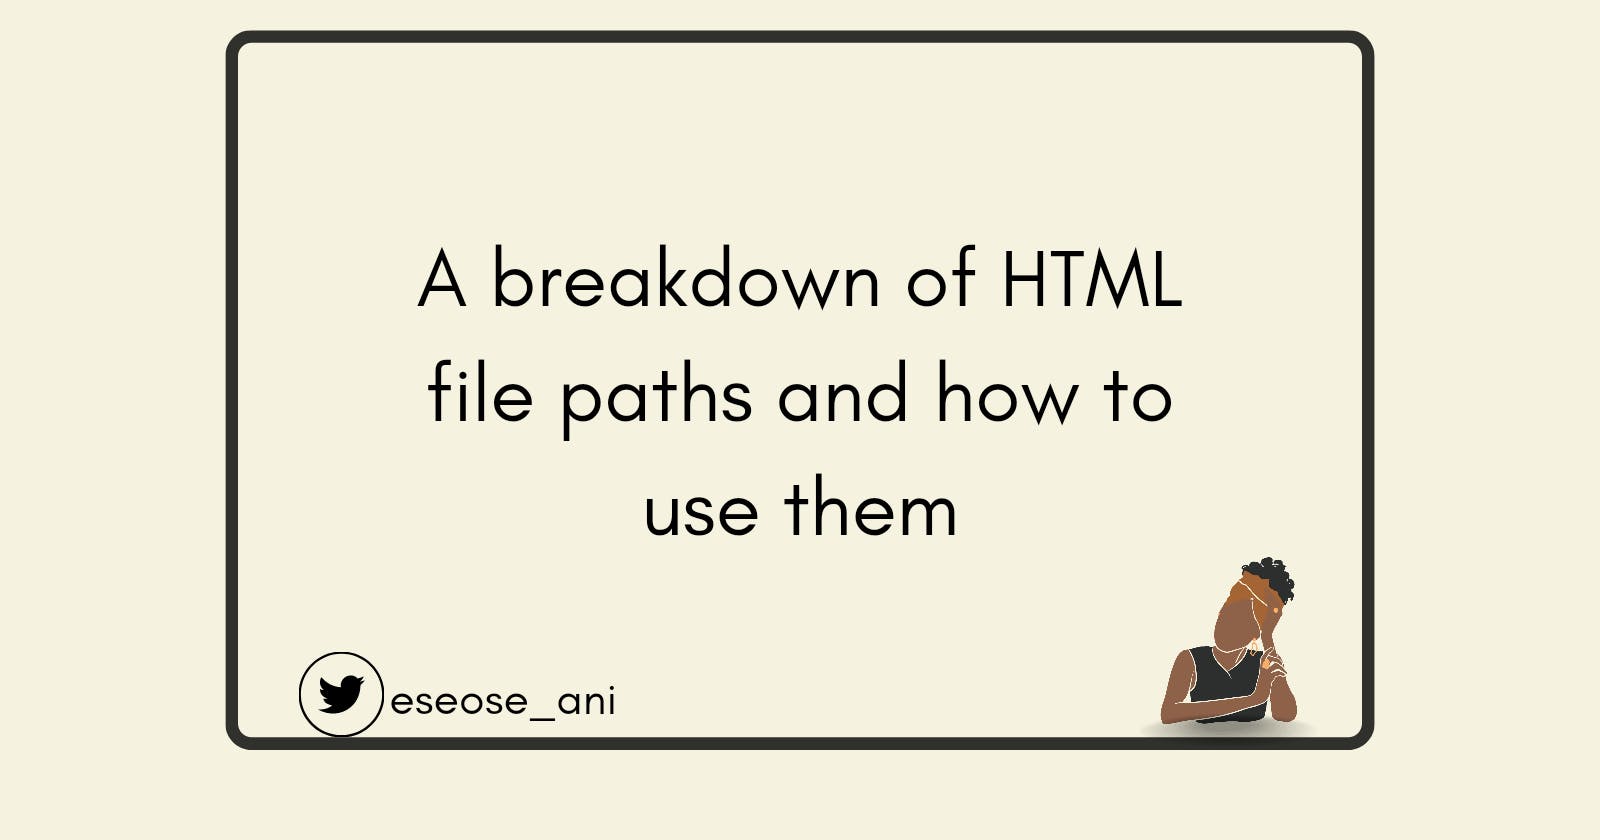 A breakdown of HTML file paths and how to use them